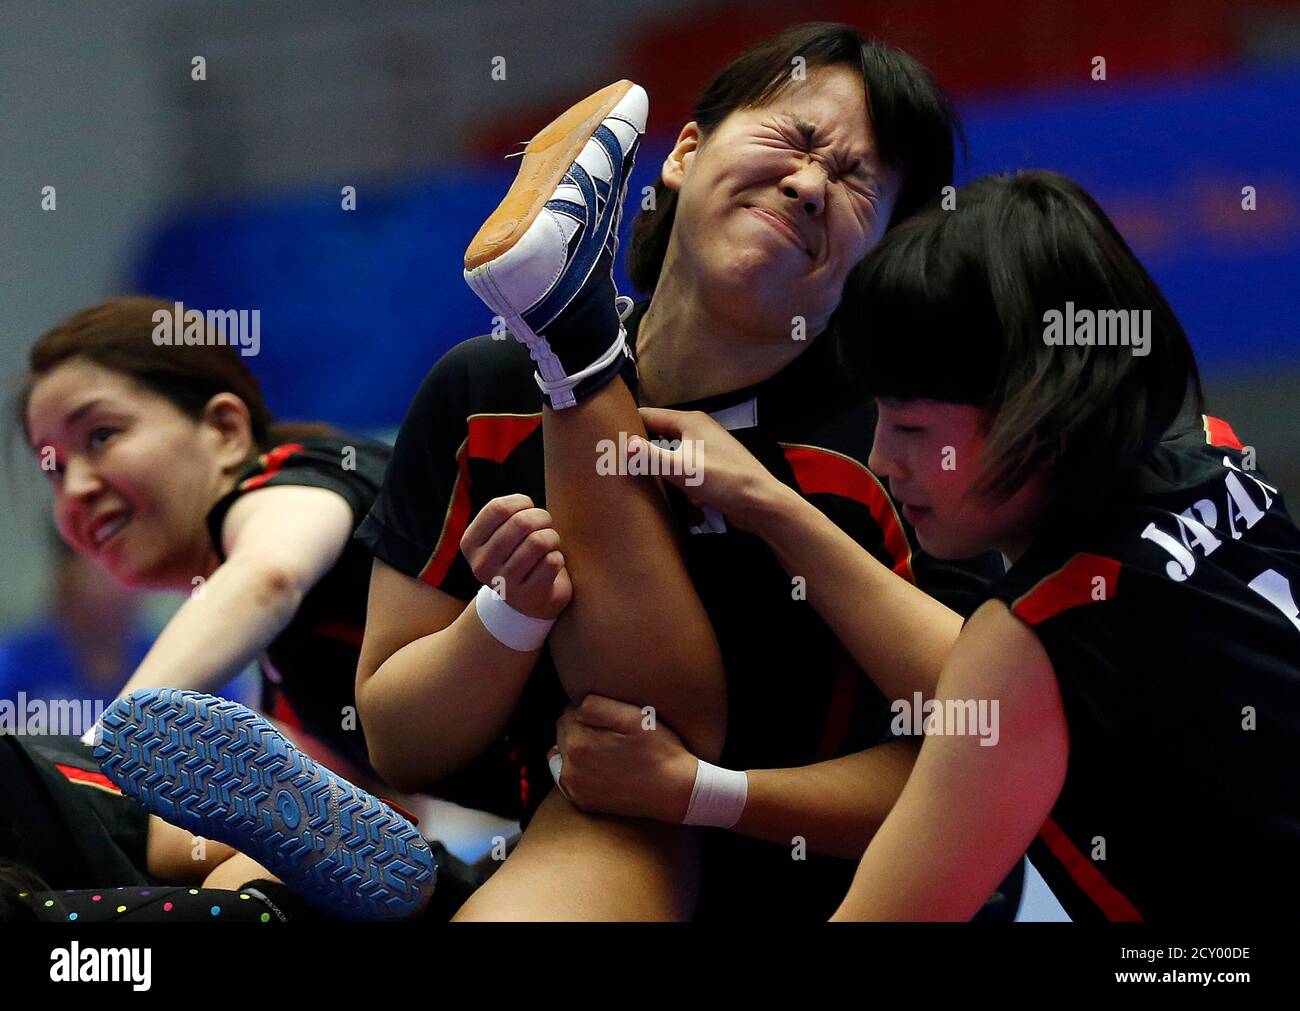 Japan's Yumi Kaneko, Eri Kasahara and Miho Echizenya (L-R) tackle a Thai player during their women's preliminary kabaddi match in the Songdo Global University Gymnasium at the 17th Asian Games in Incheon September 29, 2014.  REUTERS/Olivia Harris (SOUTH KOREA - Tags: SPORT TPX IMAGES OF THE DAY) Stock Photo